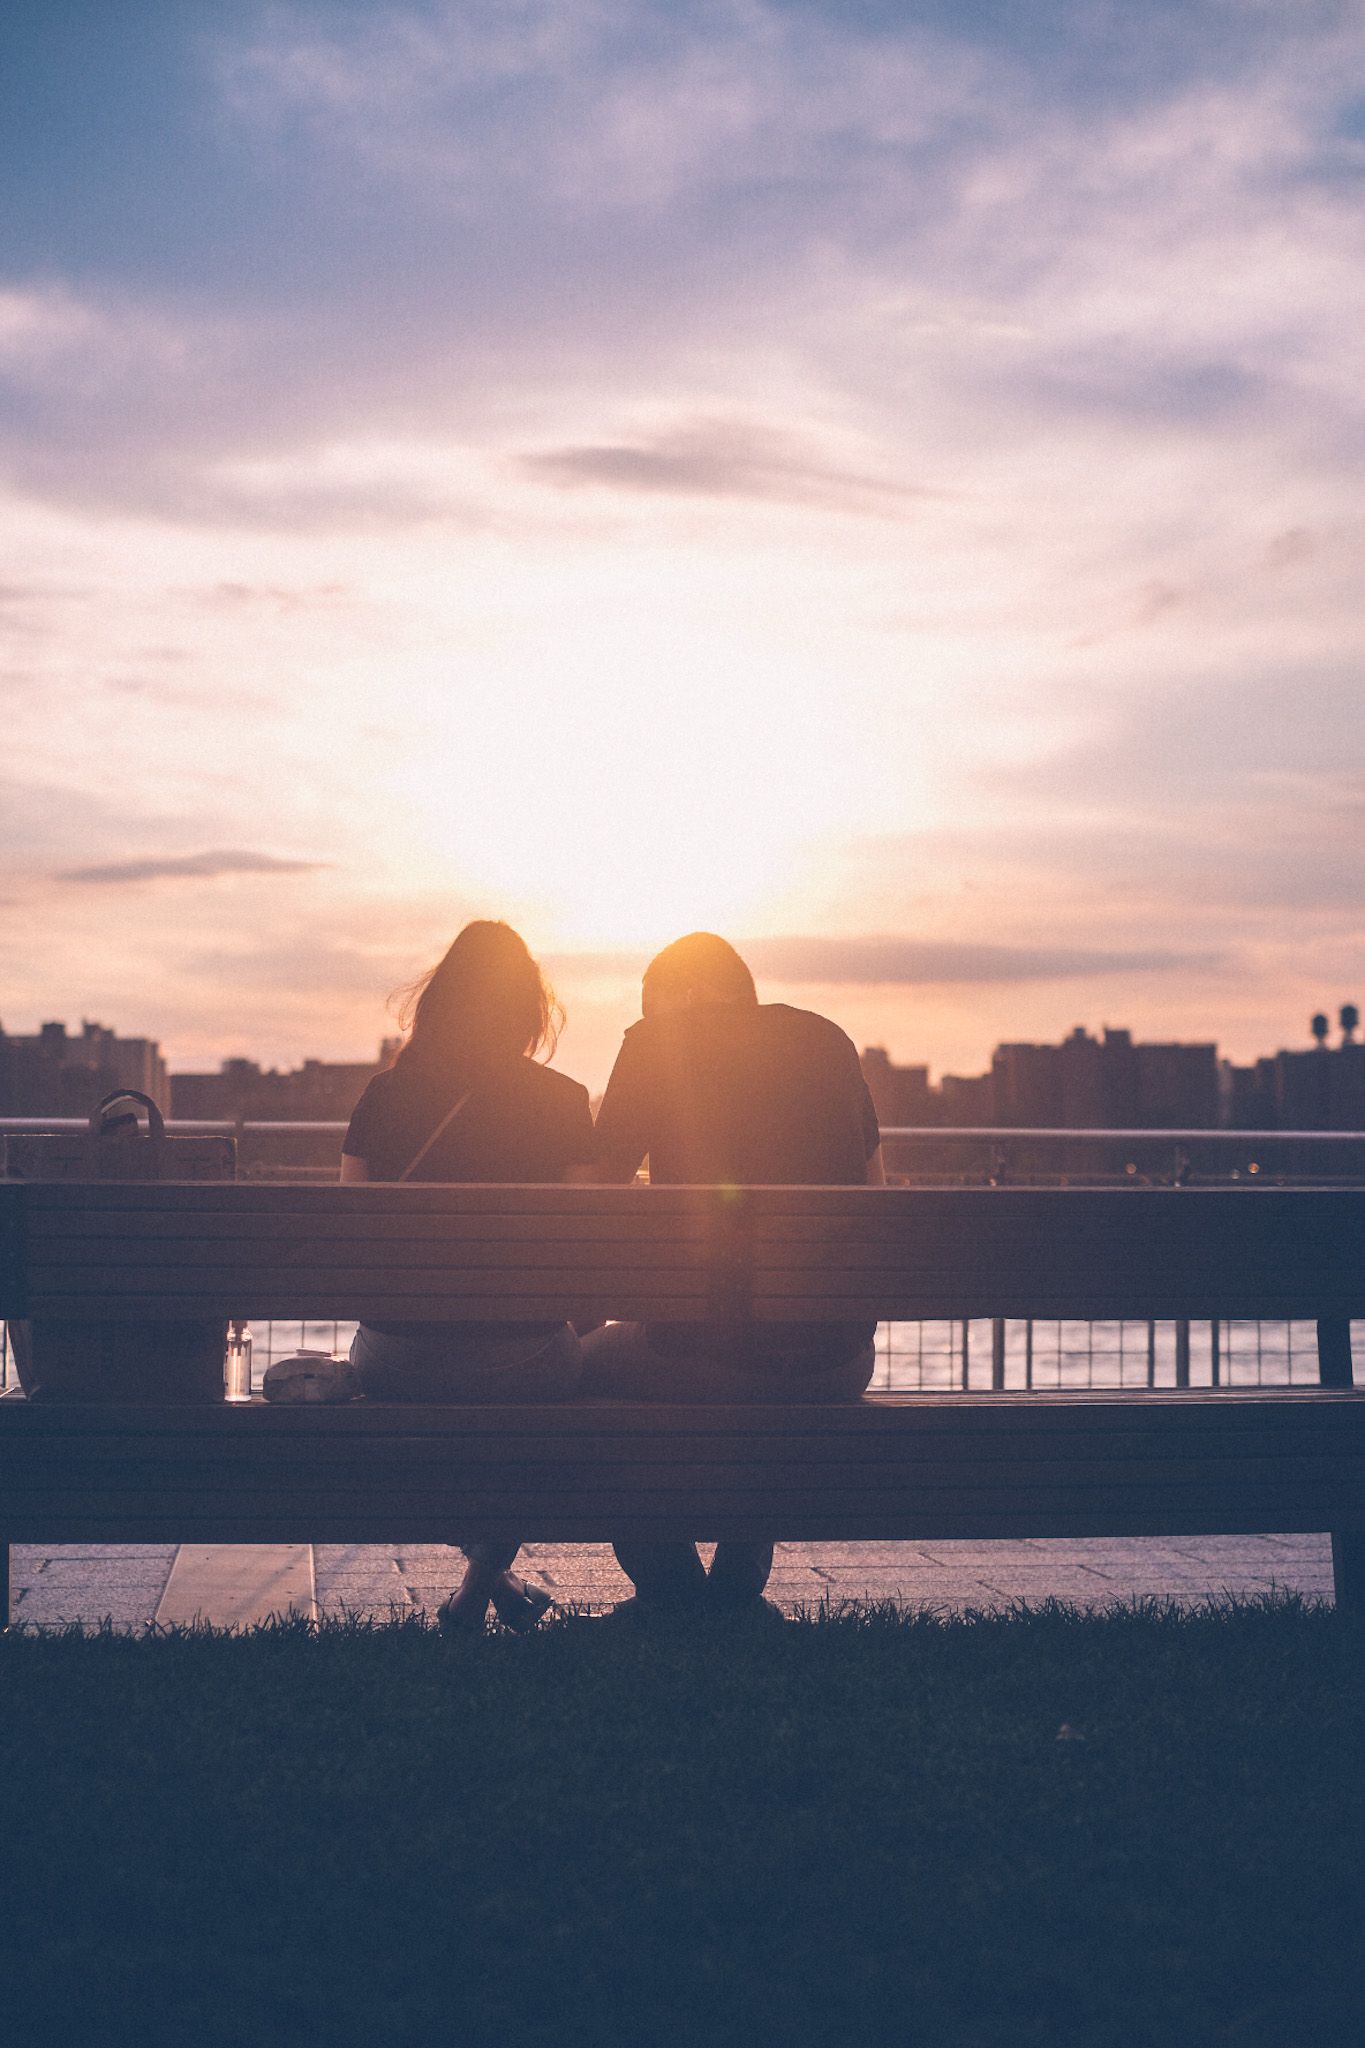 The silhouette of a couple leaning toward one another in front of a warm sunset, sitting on a bench by water.